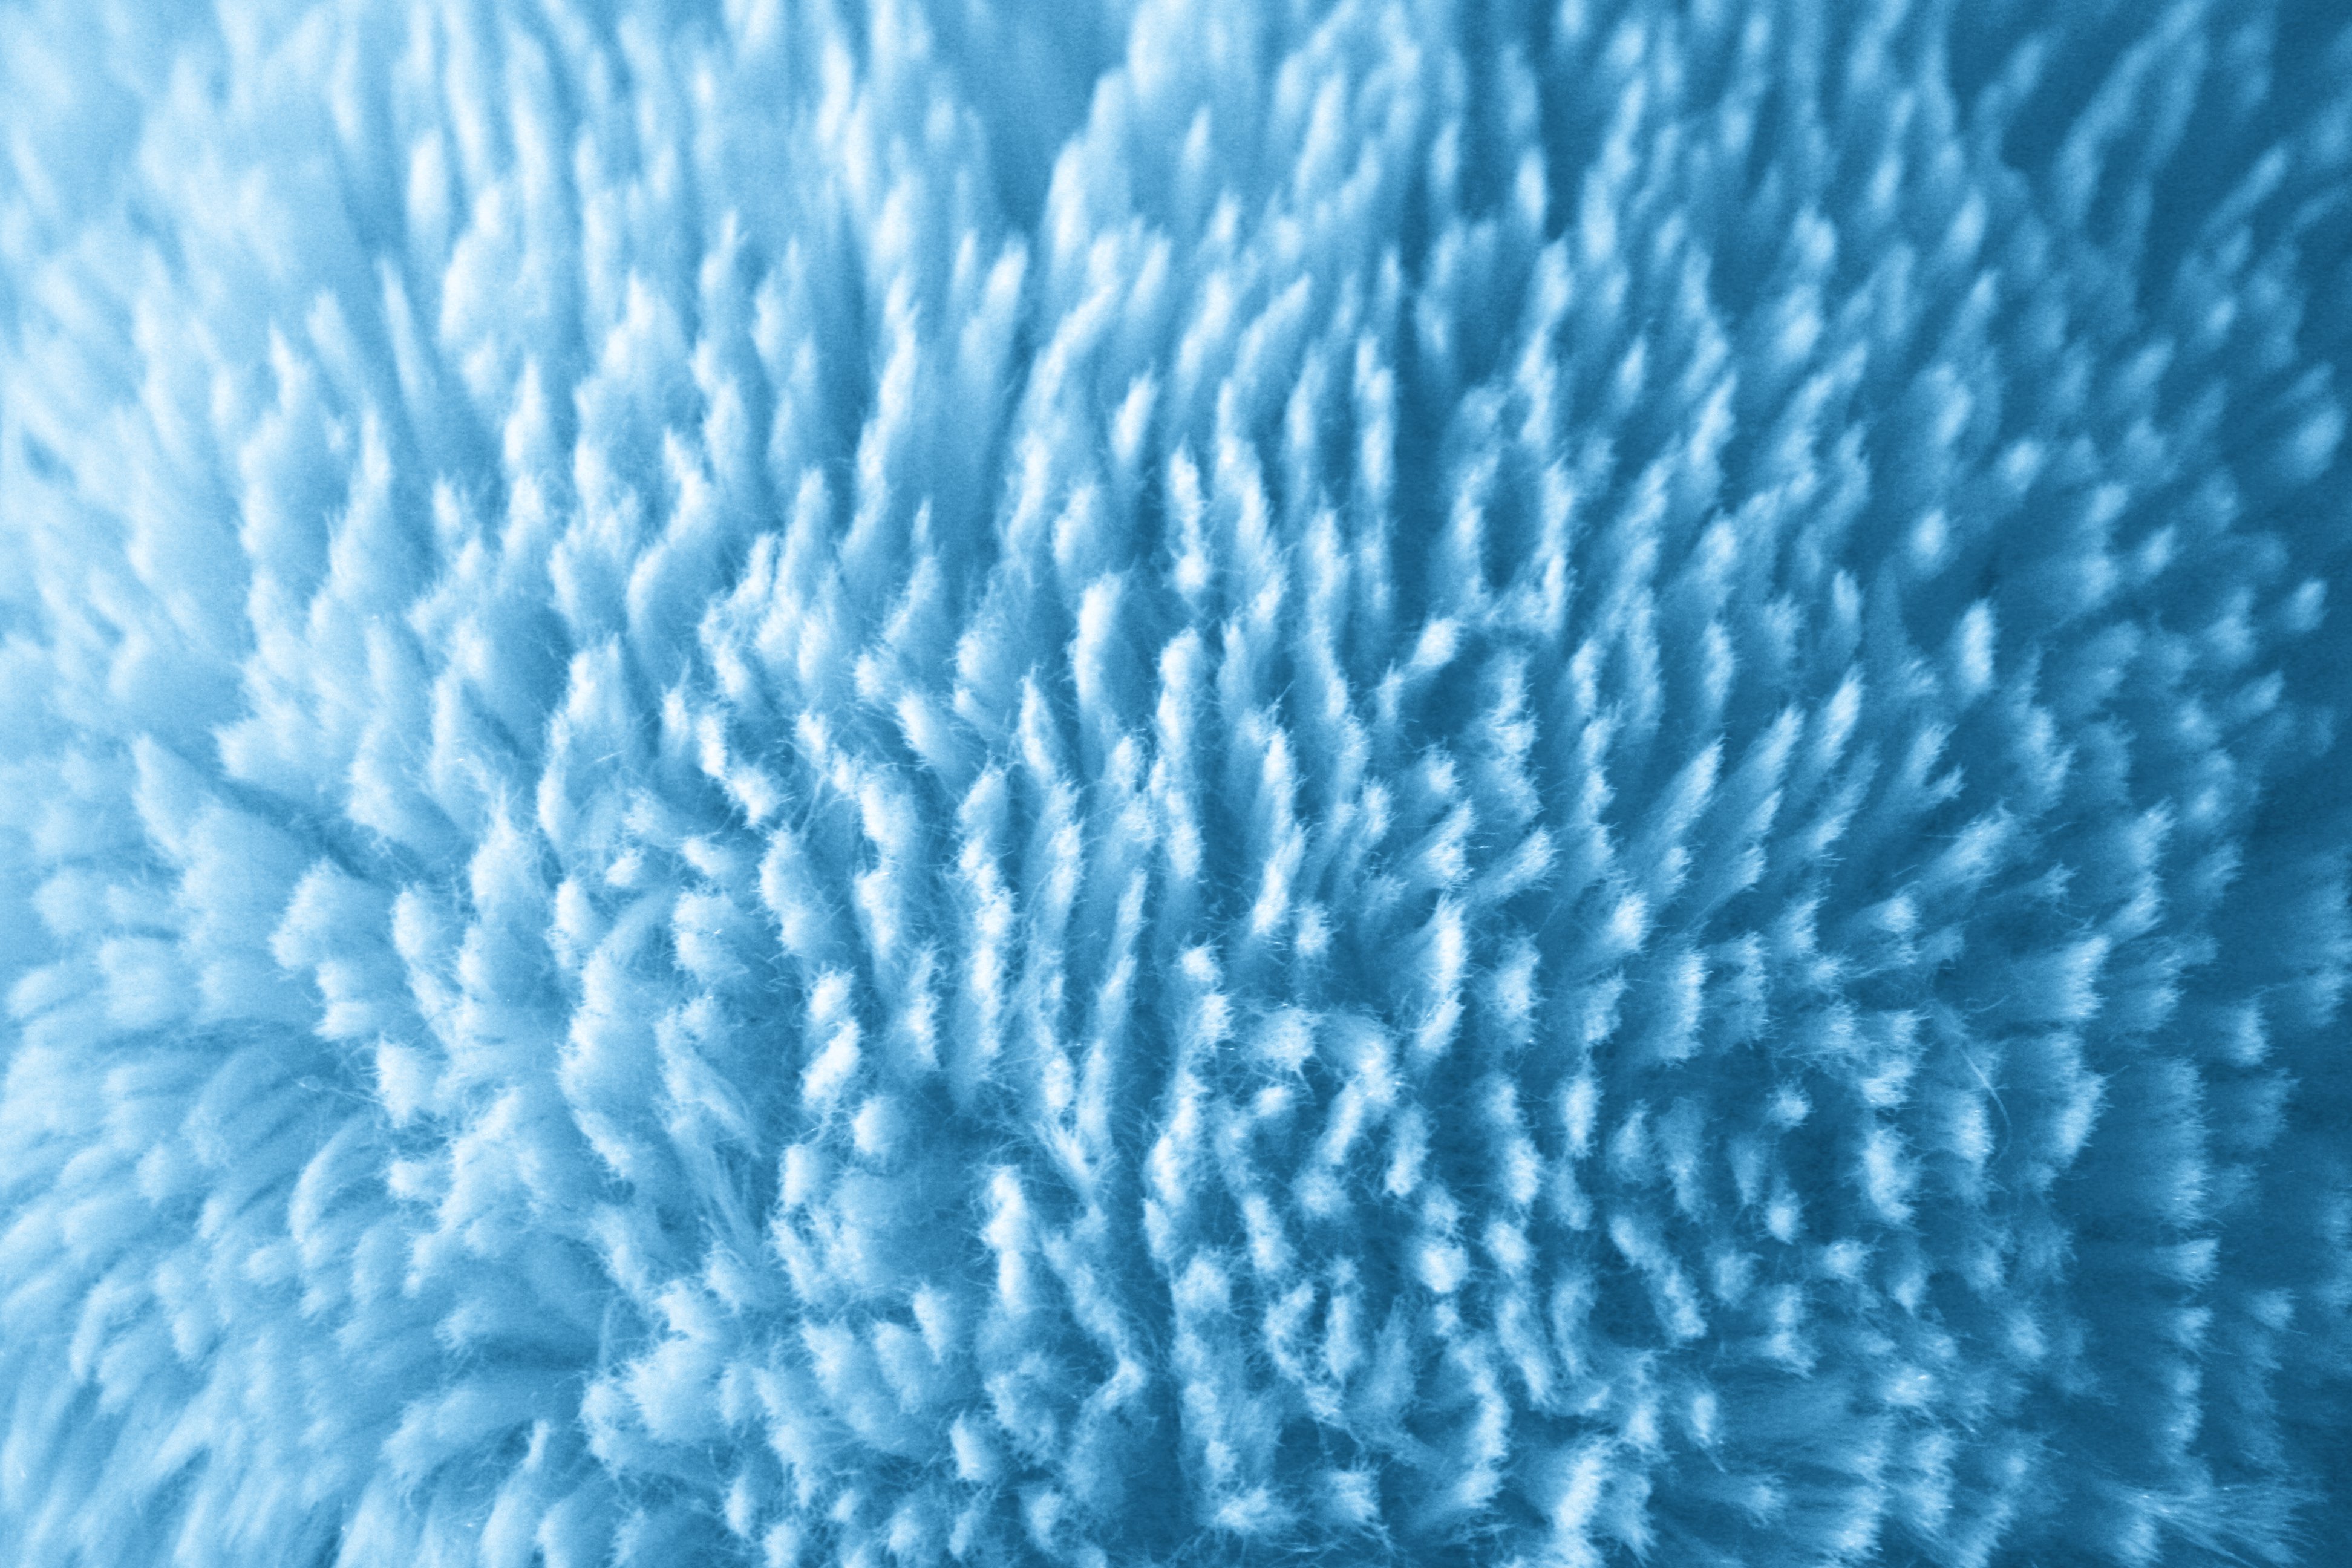 Plush Baby Blue Fabric Texture Picture | Free Photograph | Photos